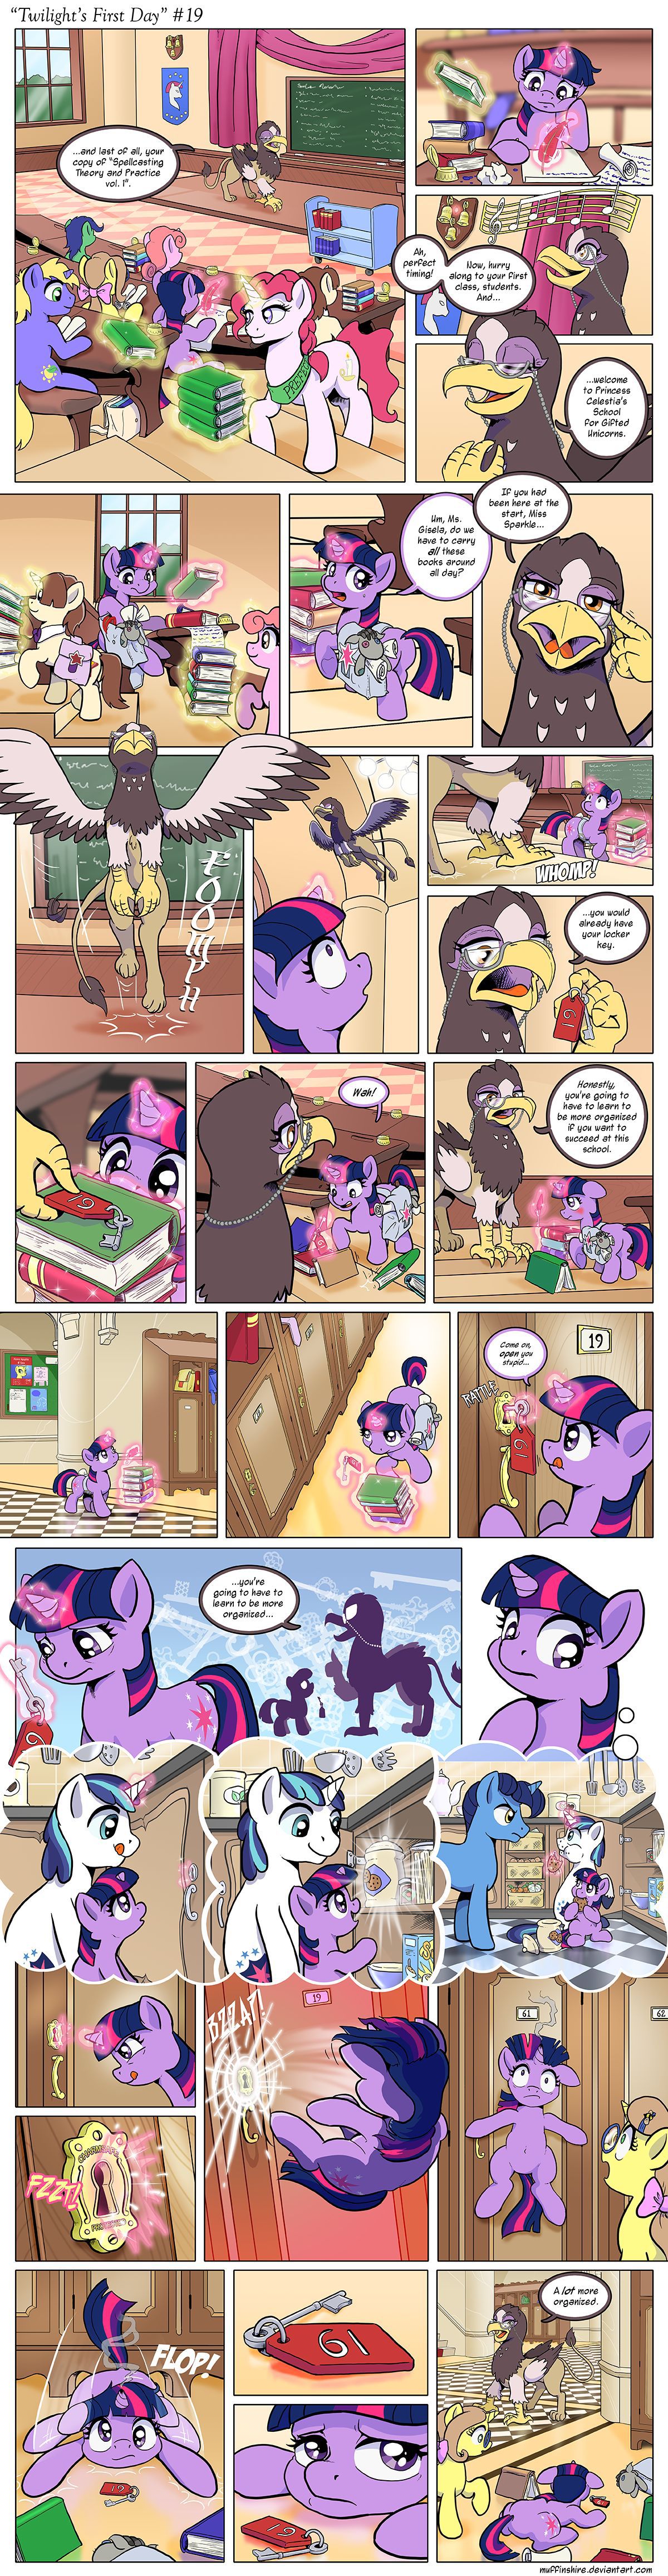 [Muffinshire] Twilight's First Day (My Little Pony: Friendship is Magic) [English] 19